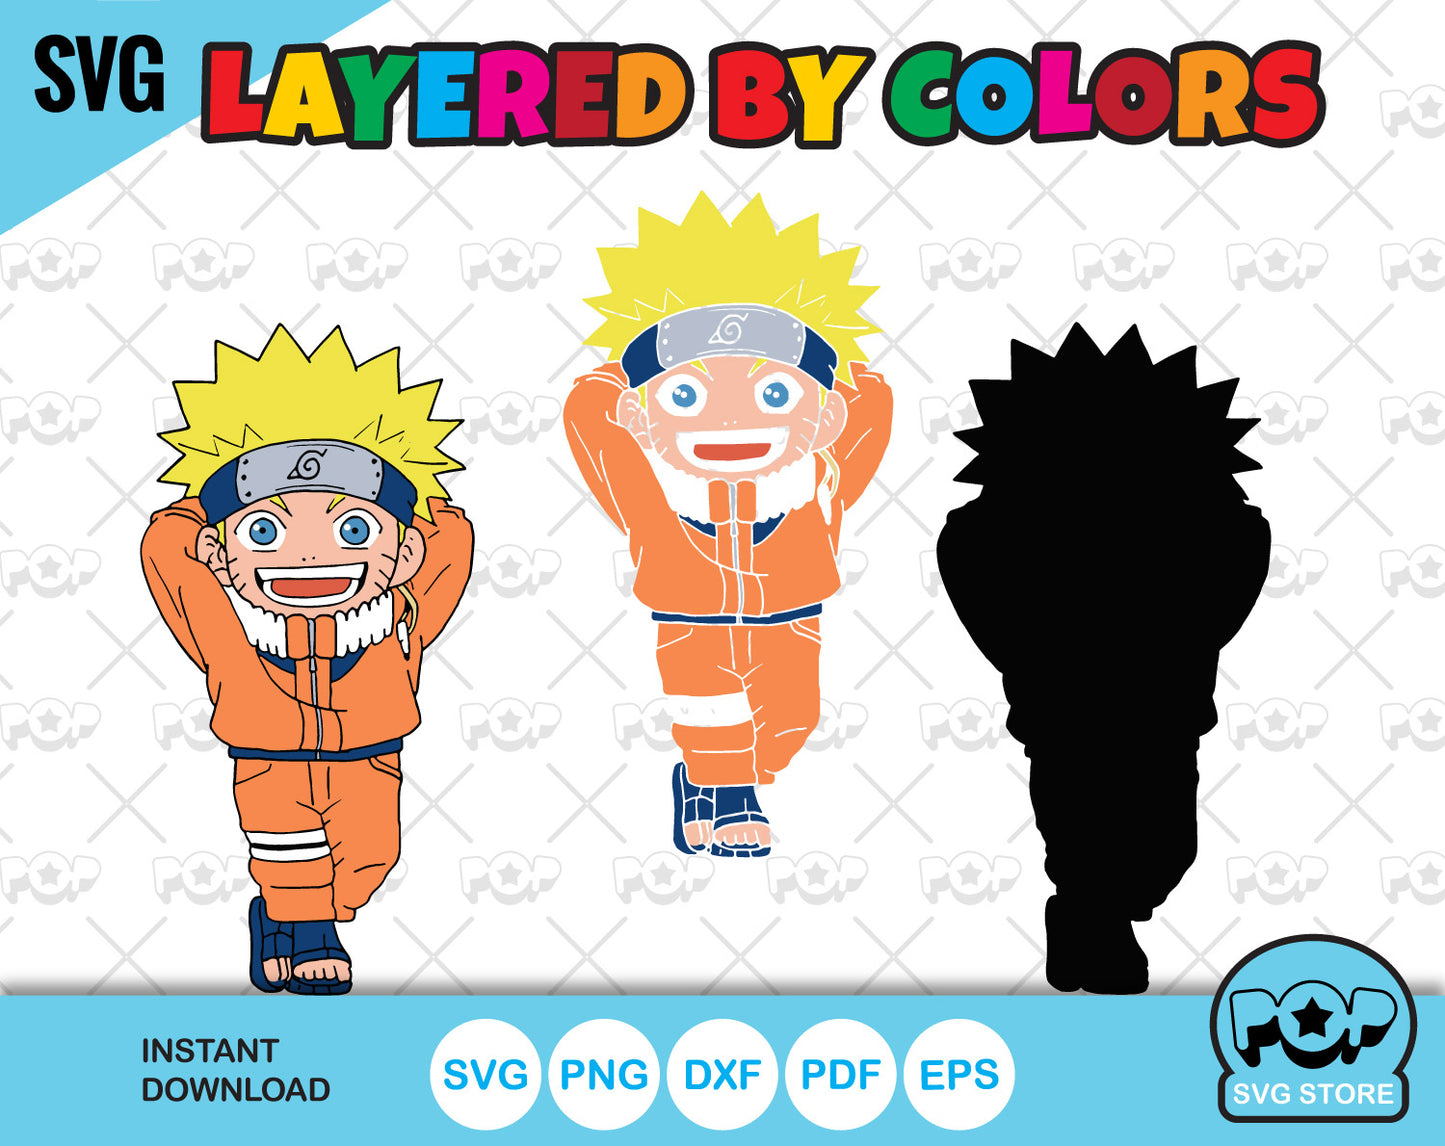 Chibi Naruto Clipart Set, Naruto SVG cut files for Cricut / Silhouette, SVG, PNG, DXF, instant download